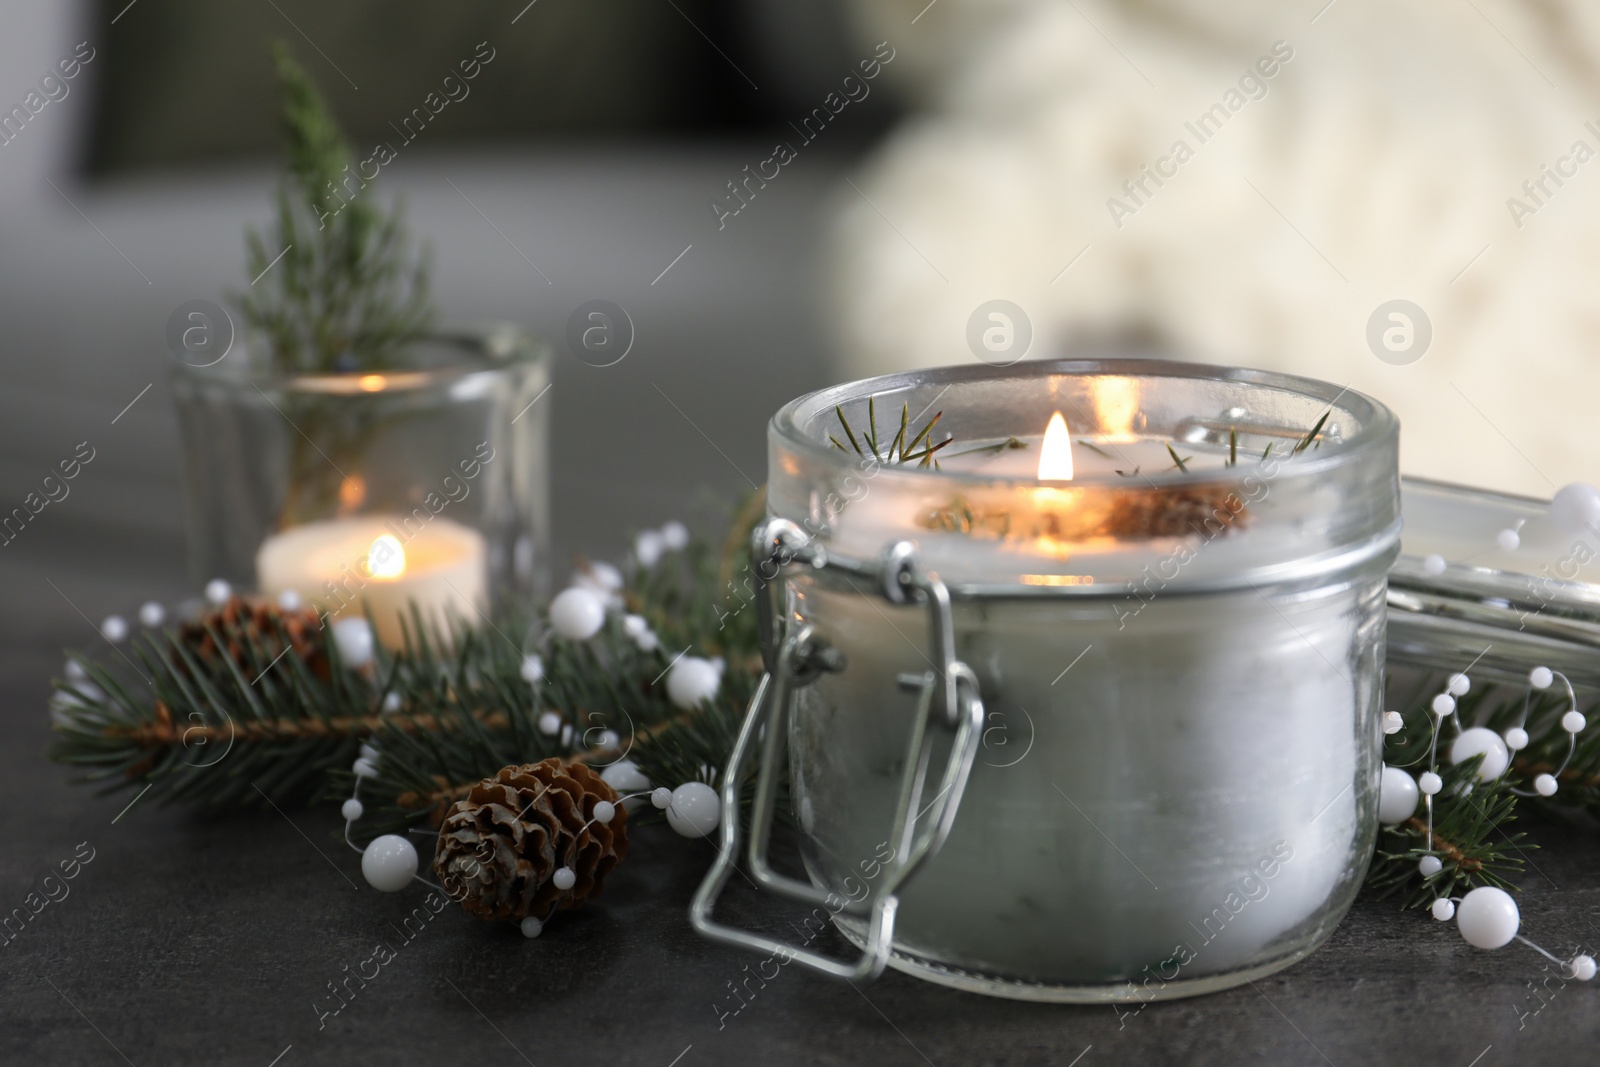 Photo of Burning scented conifer candle and Christmas decor on grey table indoors